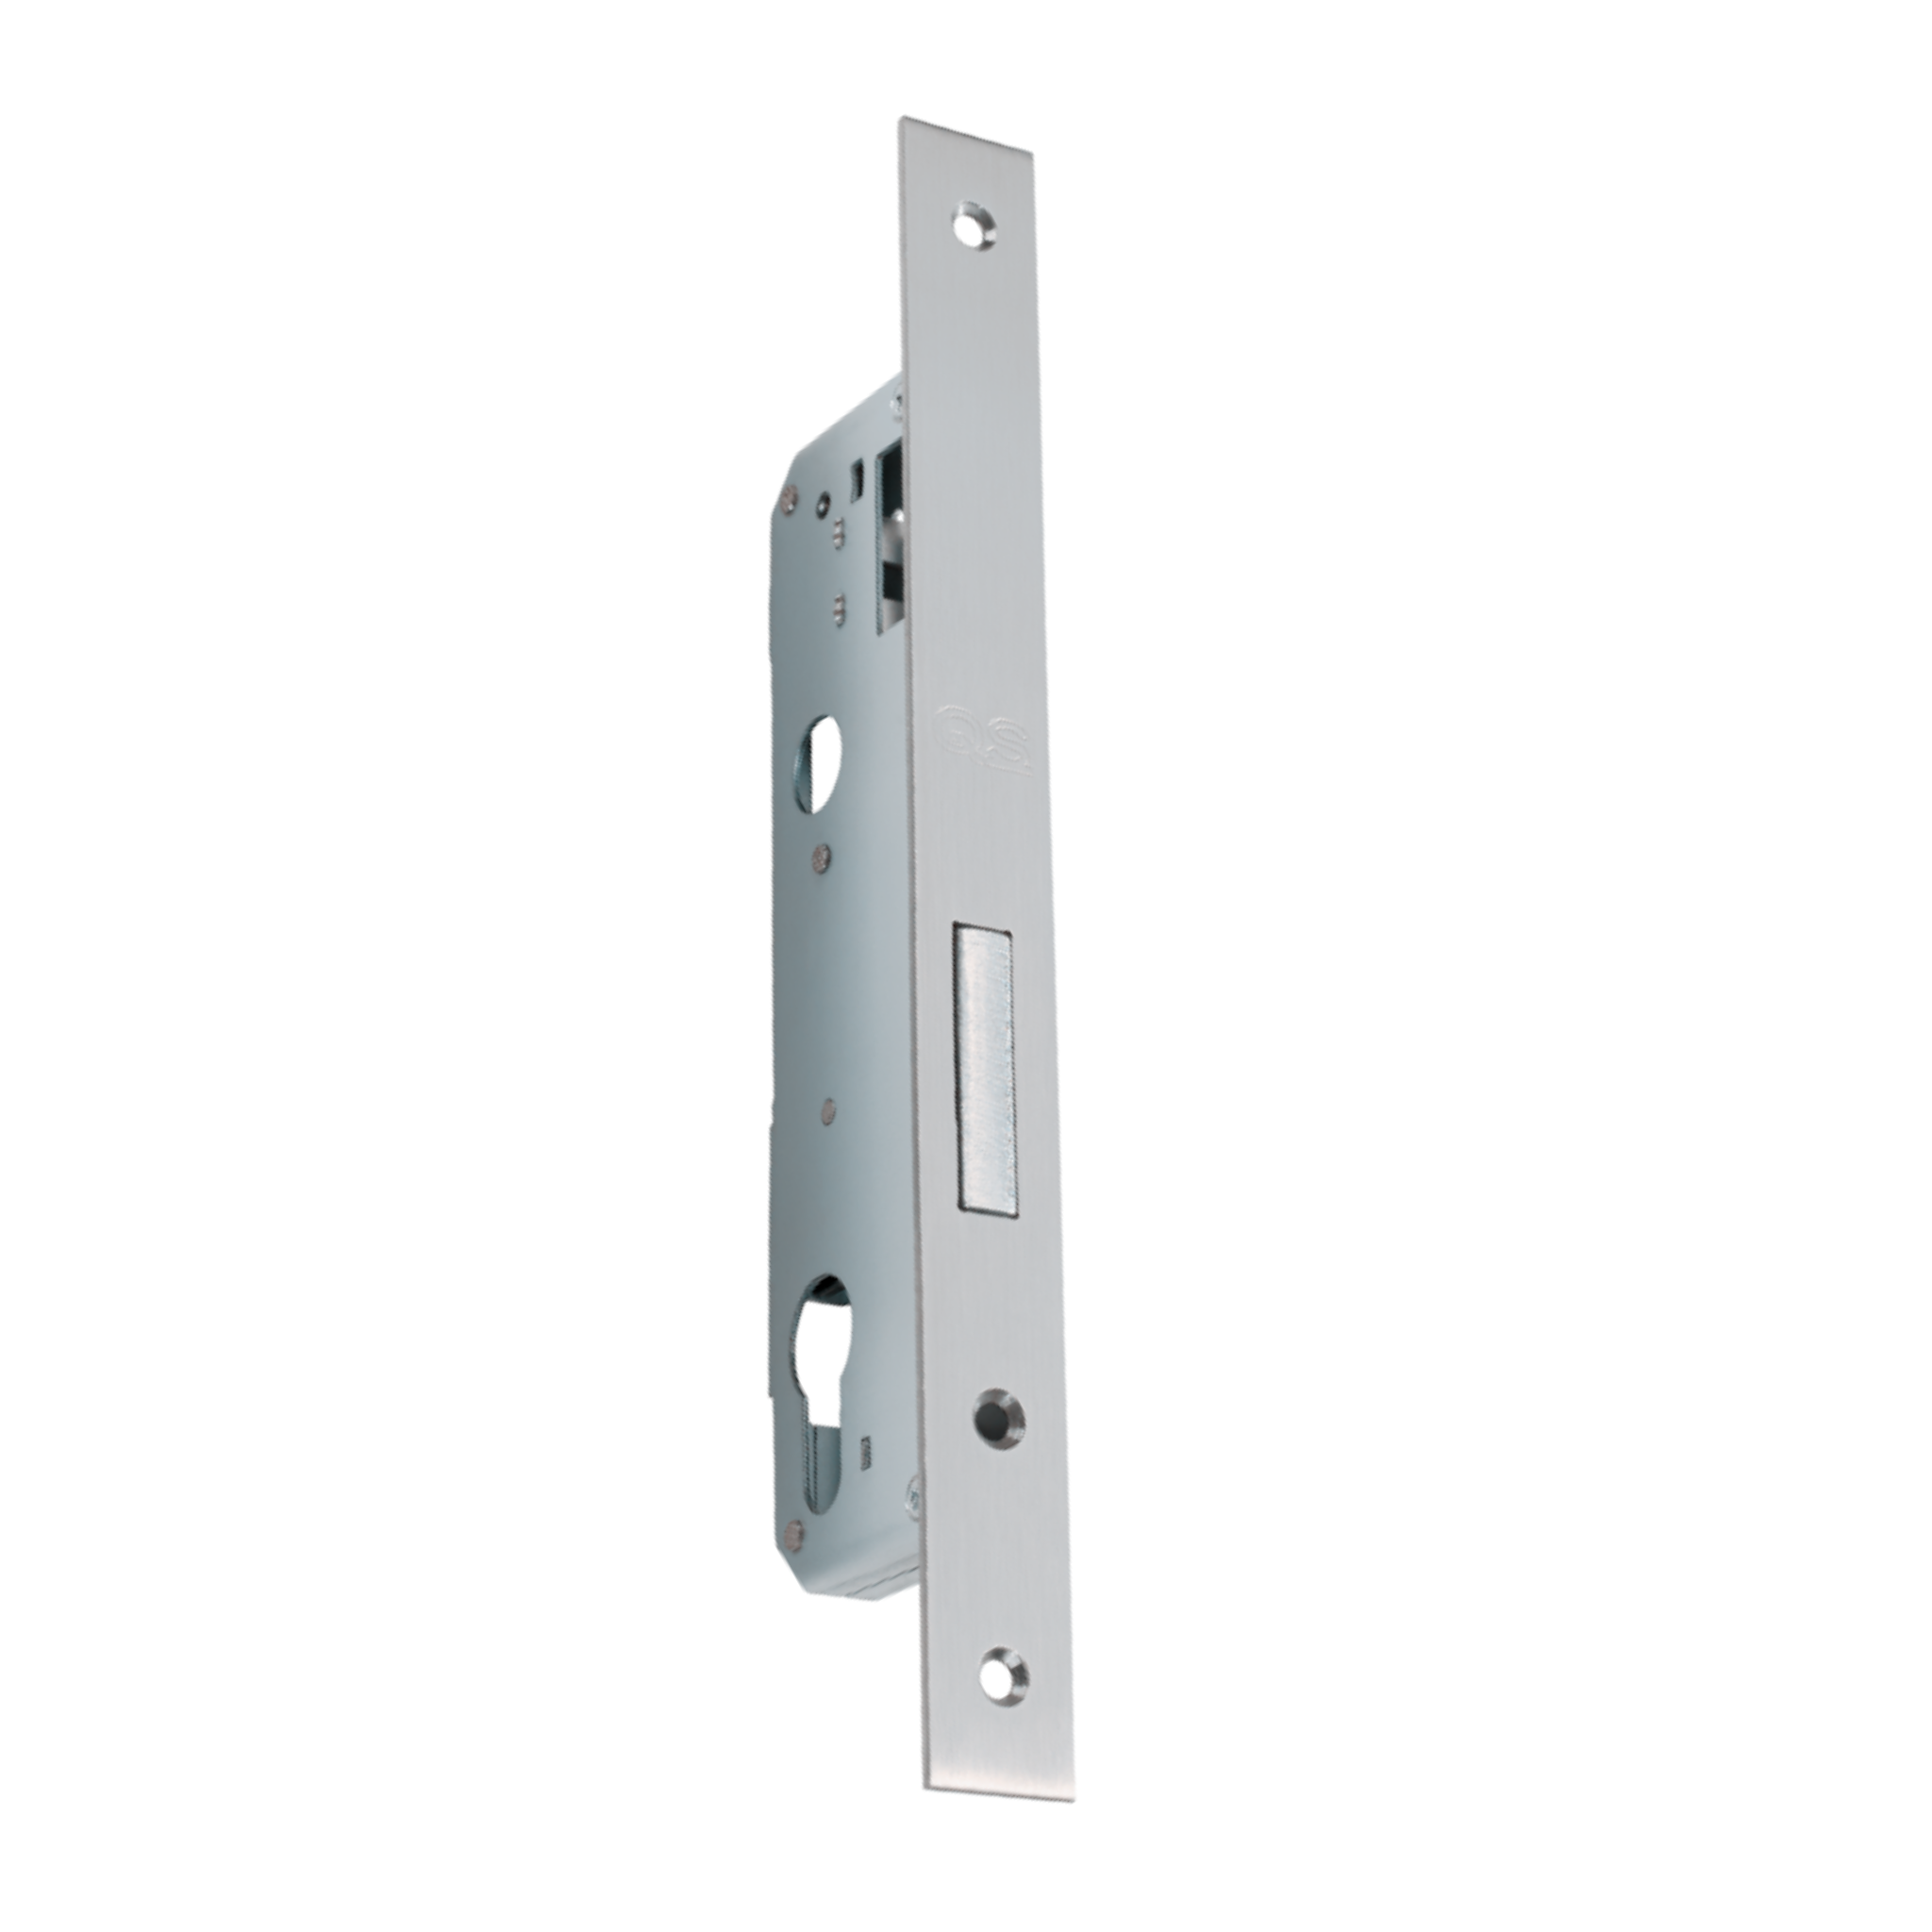 QS8525/4SS, Narrow Style, Deadbolt Lock, Euro Cylinder, Excluding Cylinder, 25mm (Backset), 85mm (ctc), Stainless Steel, QS